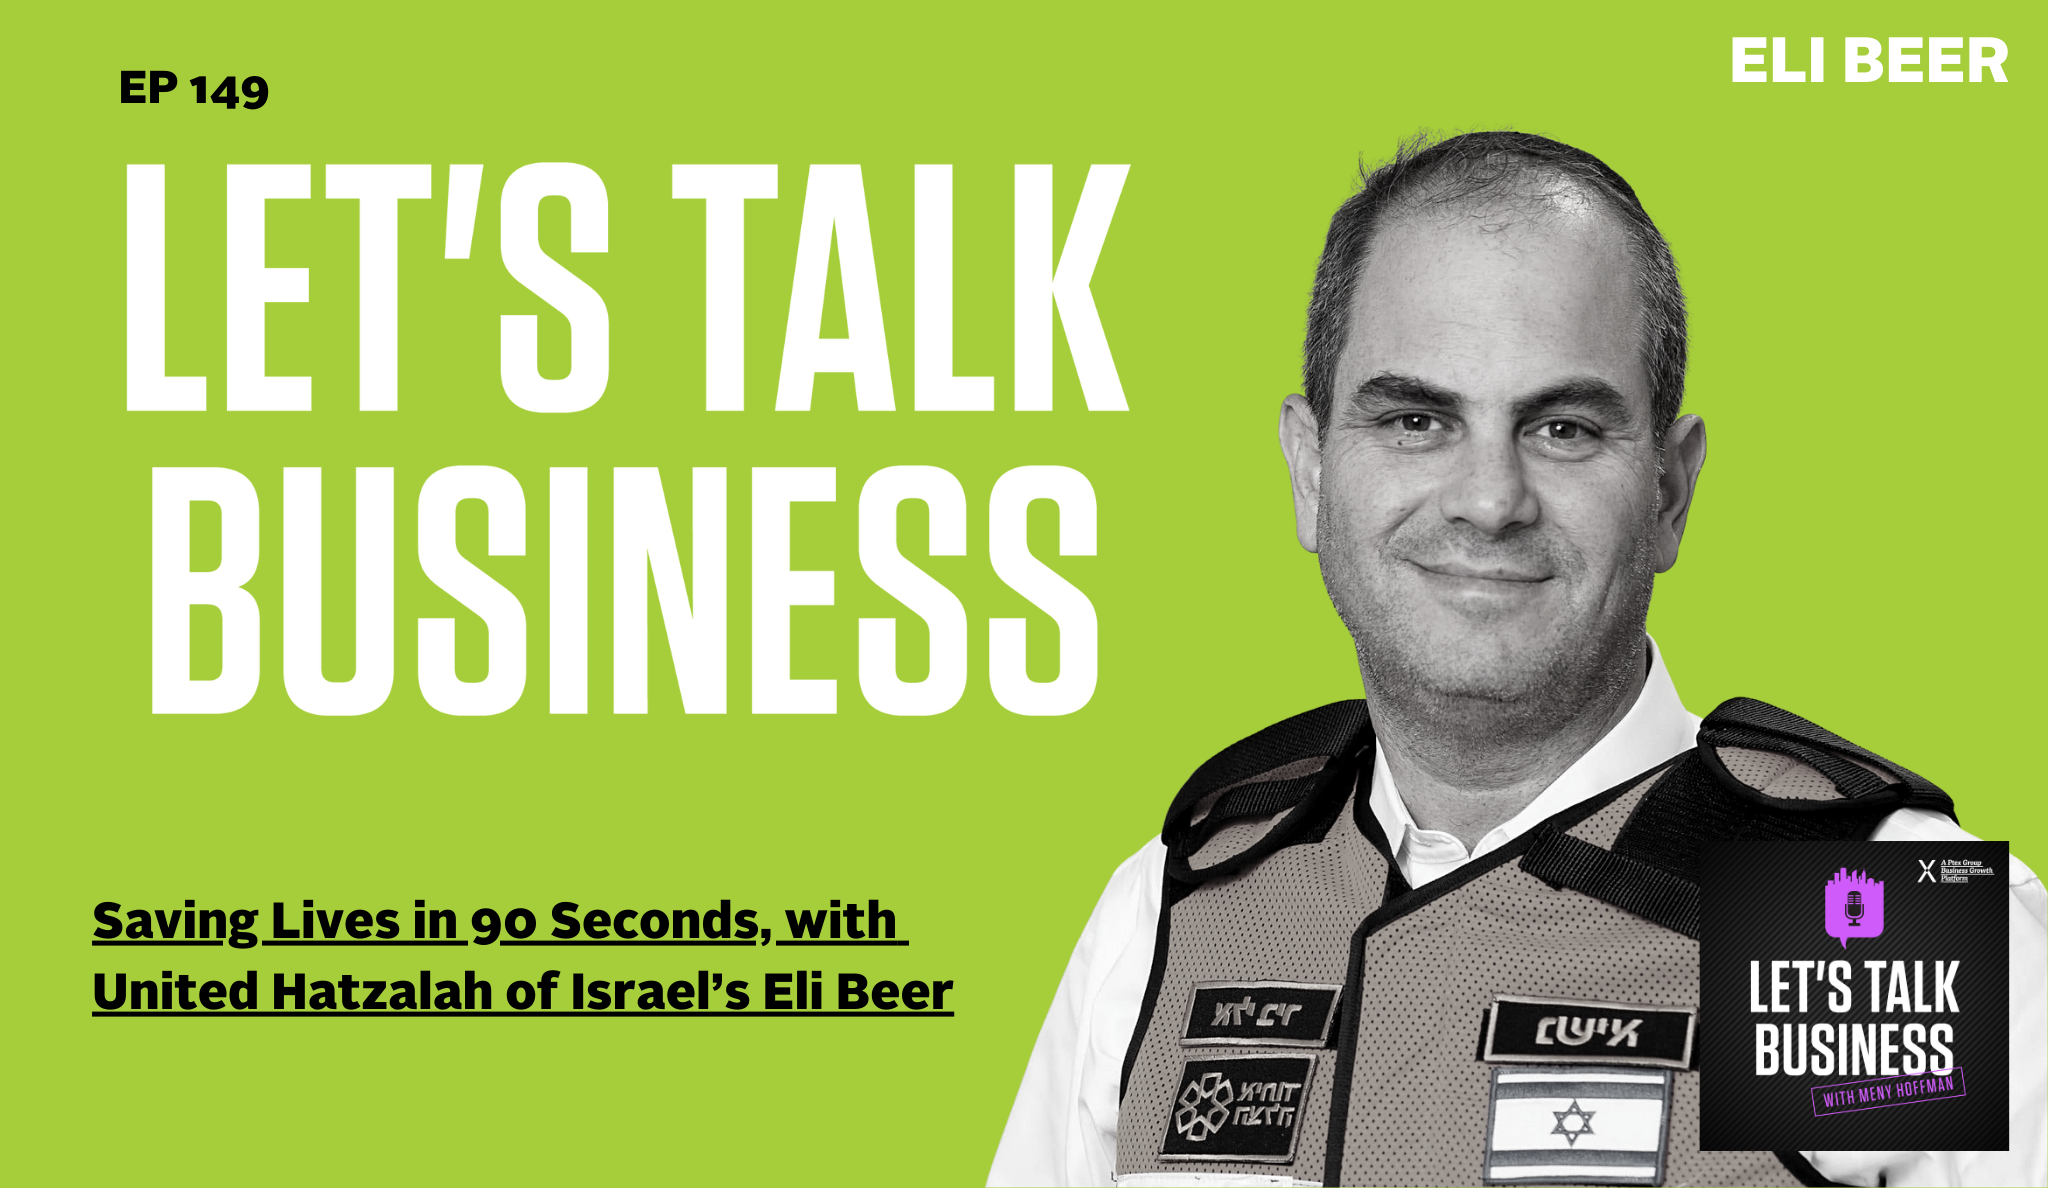 Saving Lives in 90 Seconds, with United Hatzalah of Israel’s Eli Beer